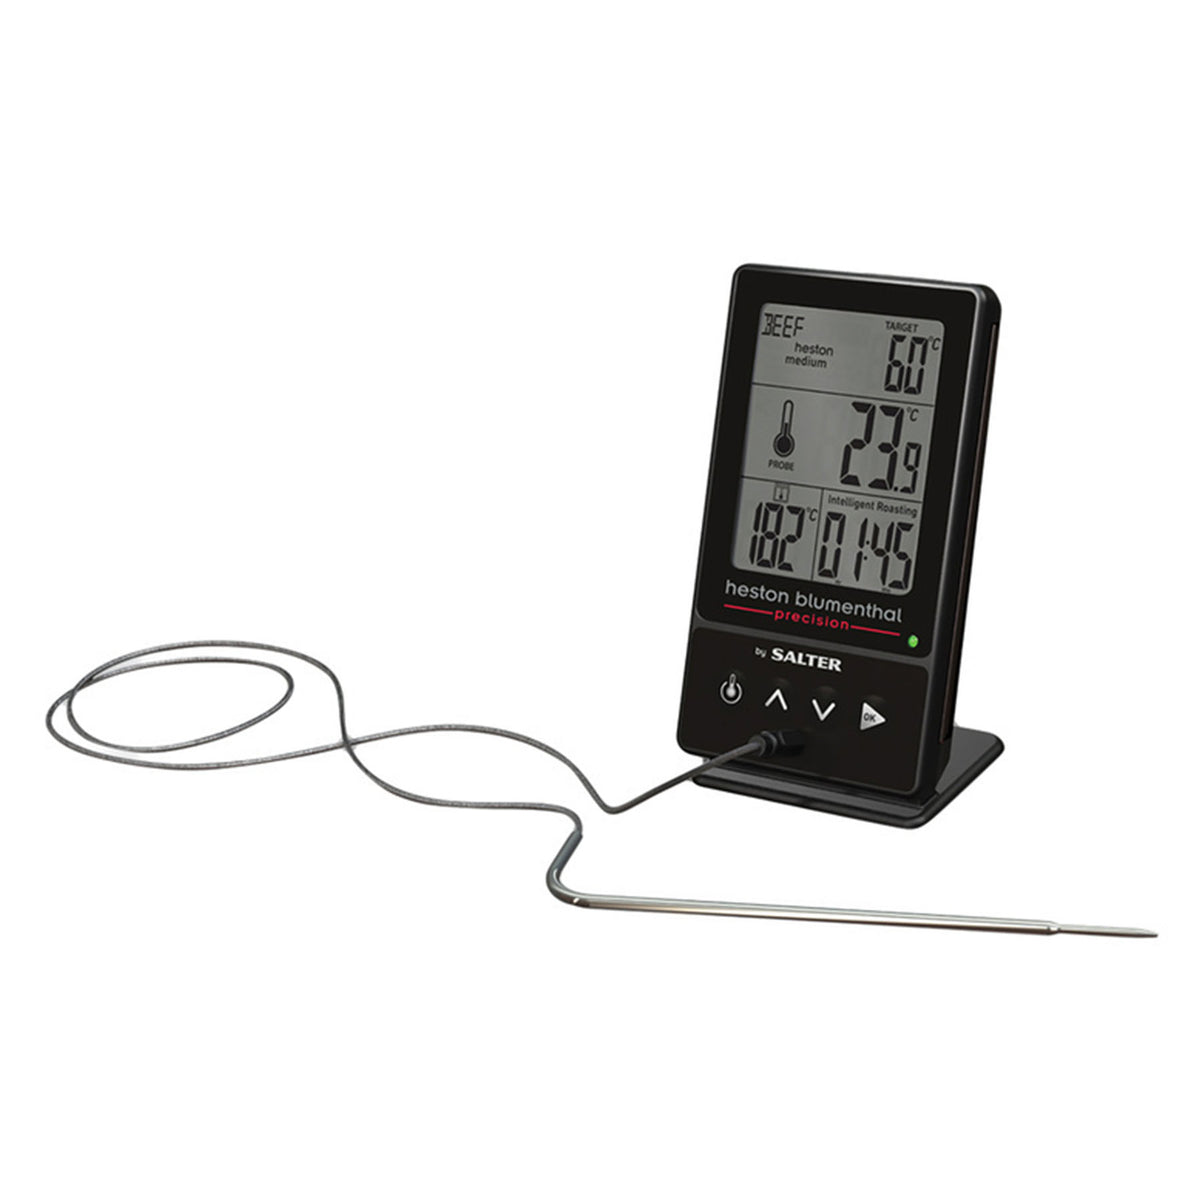 5-in-1 digital thermometer DIMENSIONS: 15x 3.5 x 22cm